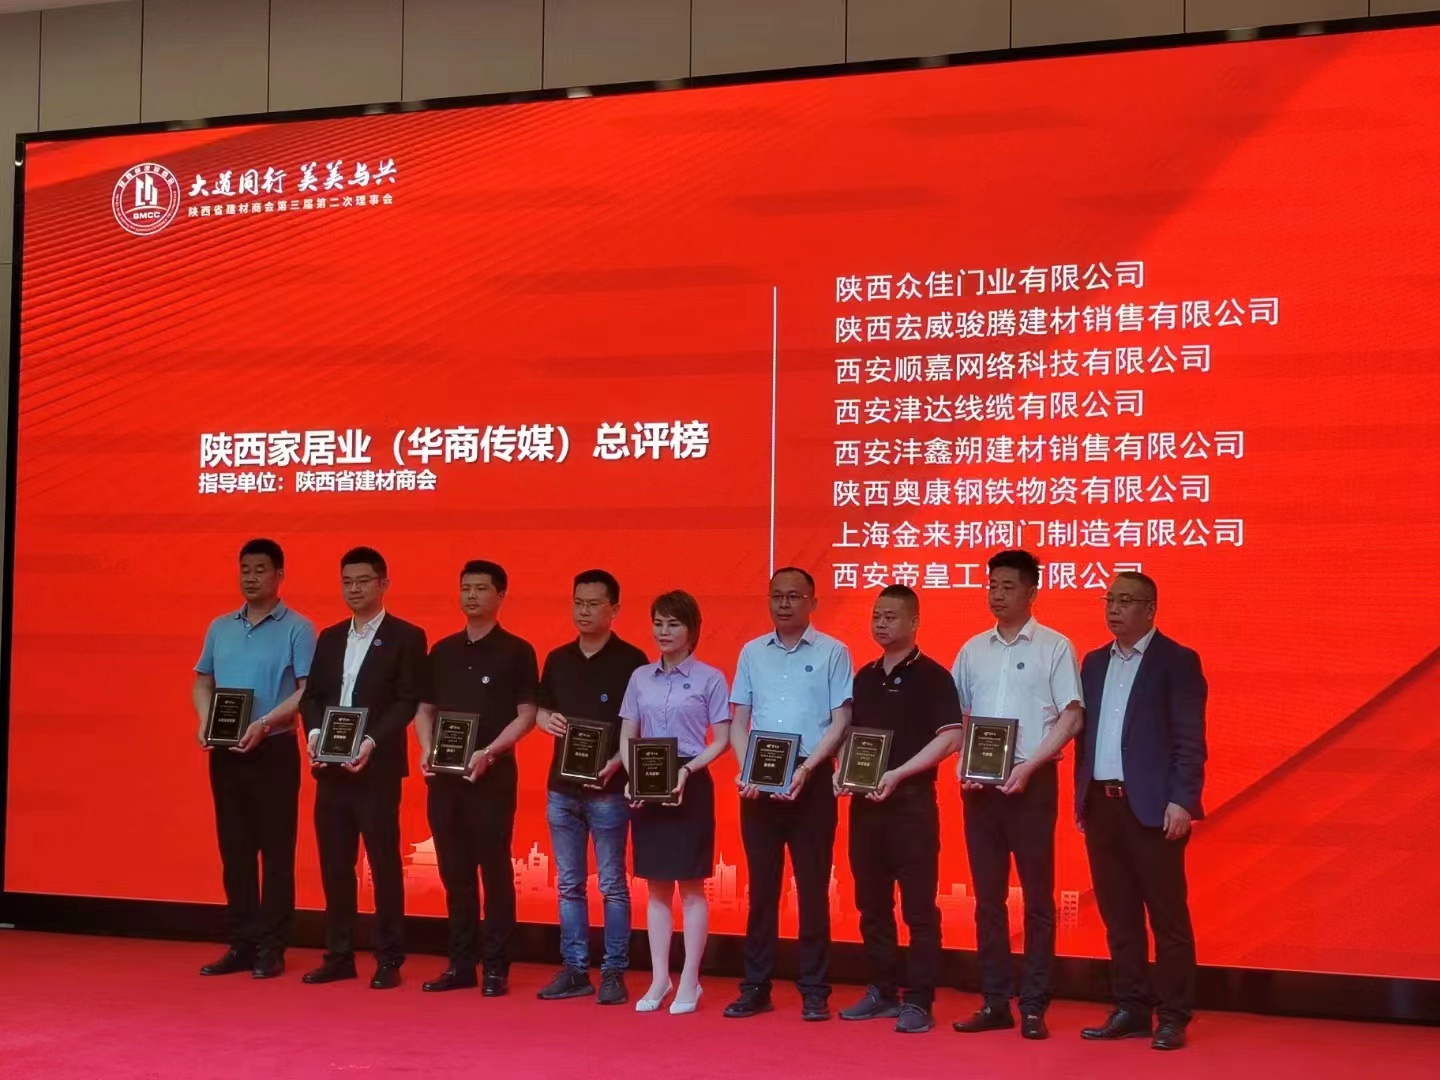 Good news||Warm congratulations to Jinlaibang Valve and Aokang Iron and Steel Co., Ltd. for winning the 